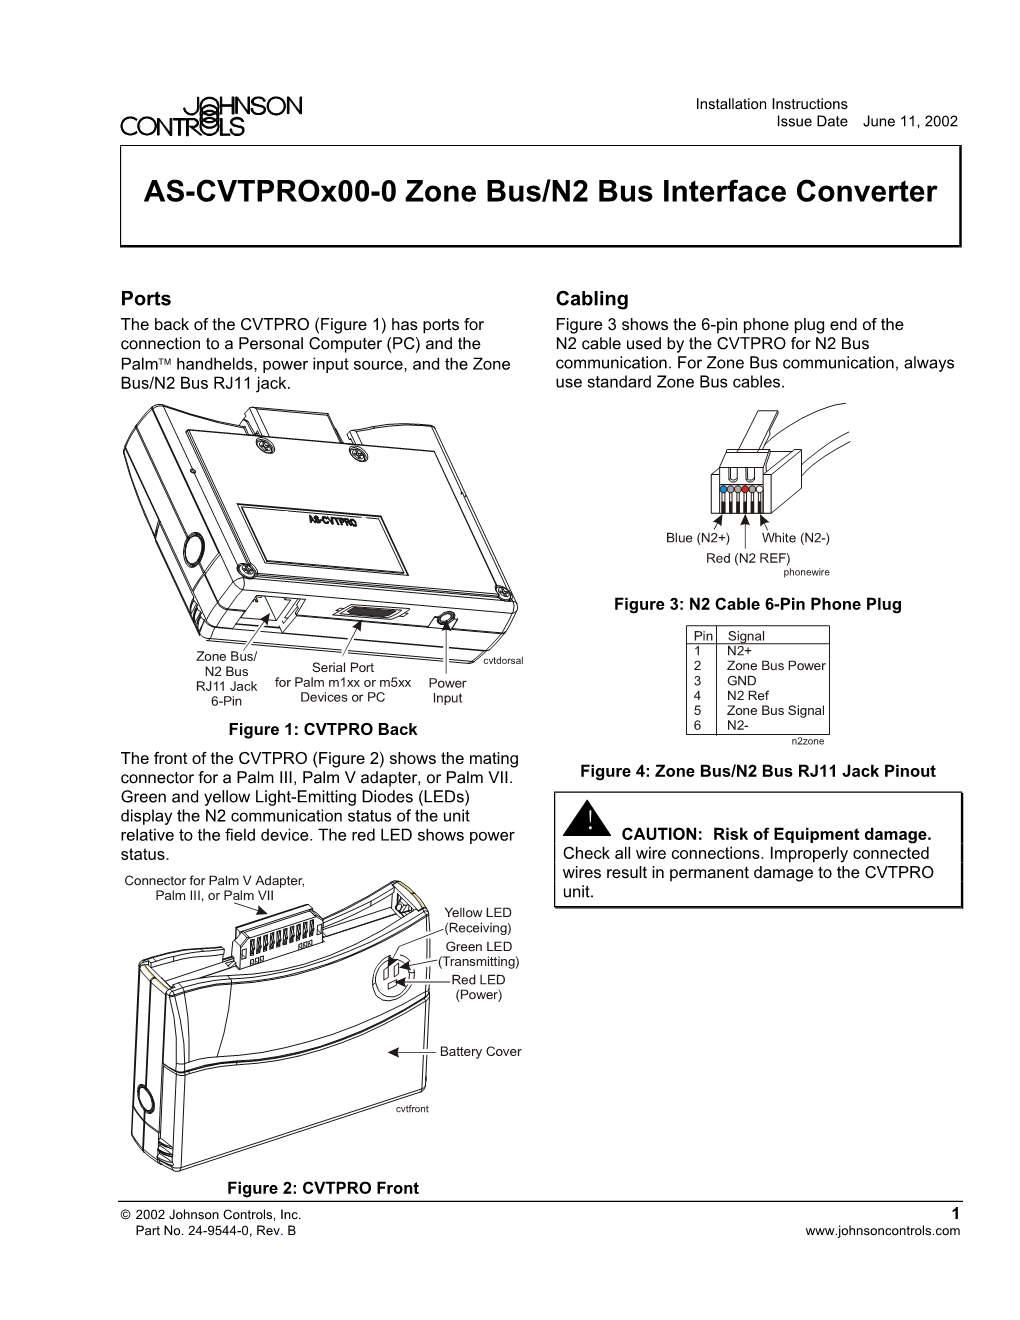 AS-Cvtprox00-0 Zone Bus/N2 Bus Interface Converter Installation Sheet Connection Figure 5 Is a Diagram of the Connections Between the CVTPRO and Other Devices